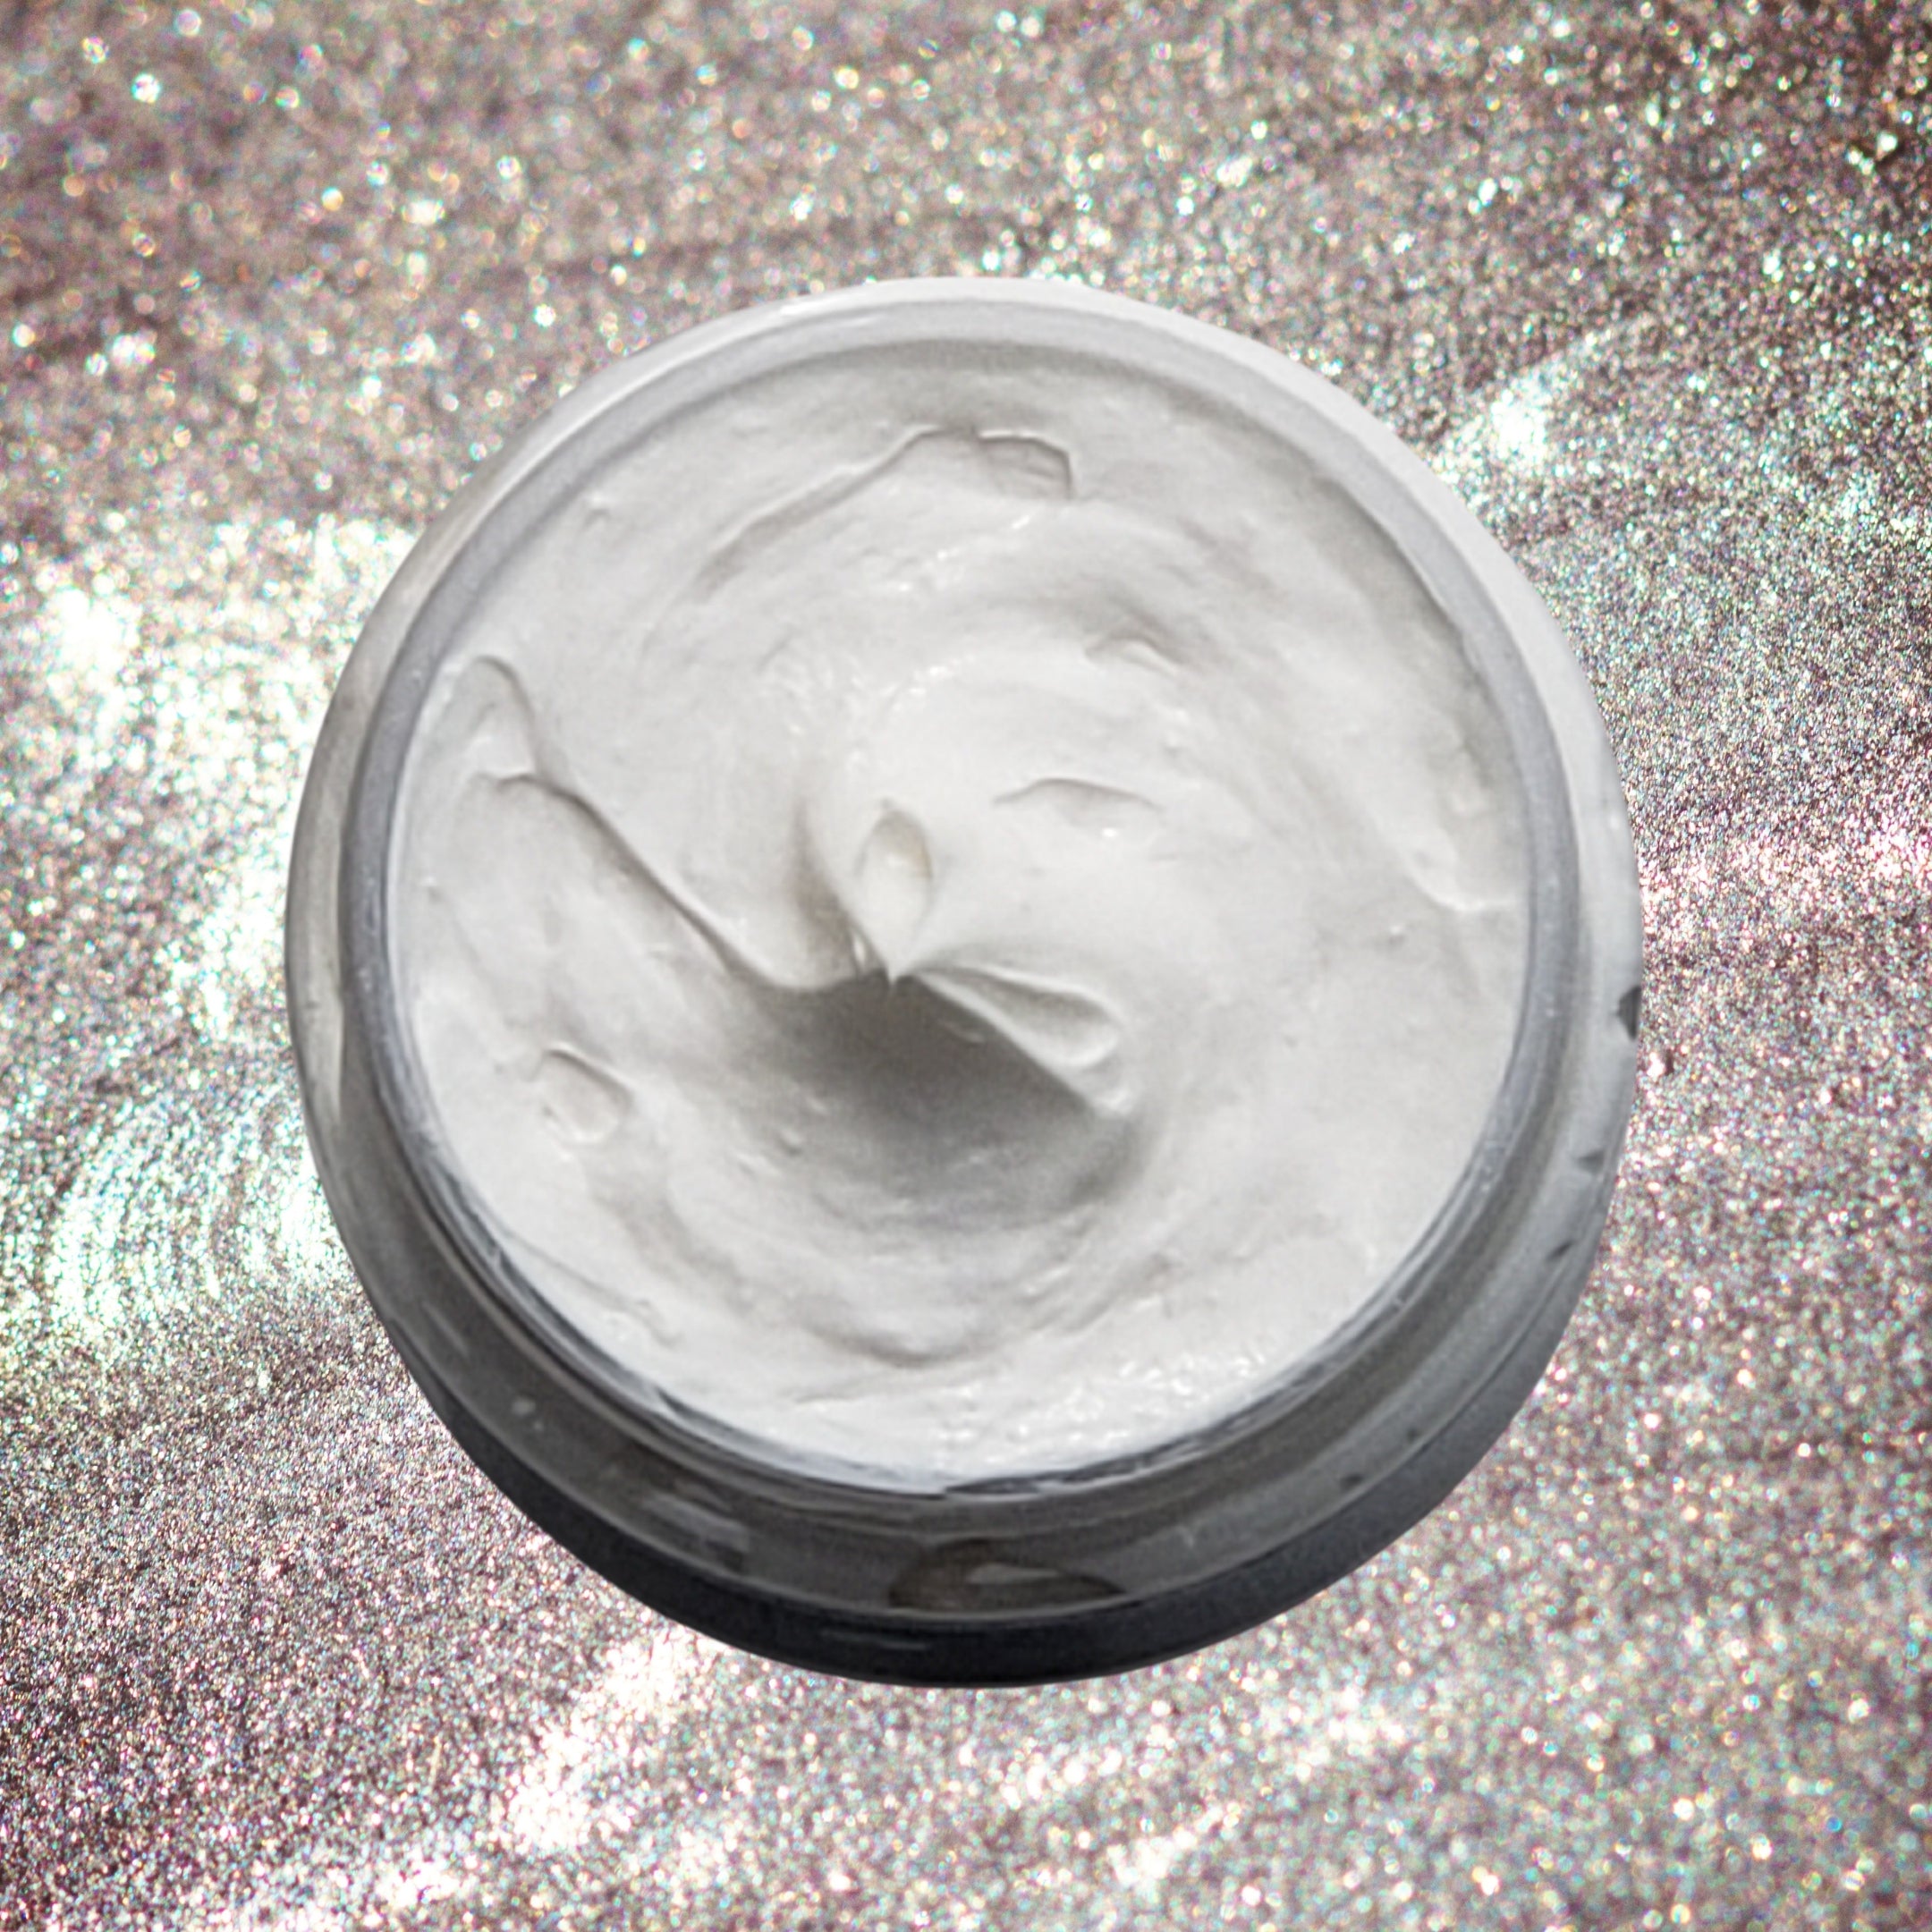 Shimmering Body Butter: The Secret to a Sparkly Life